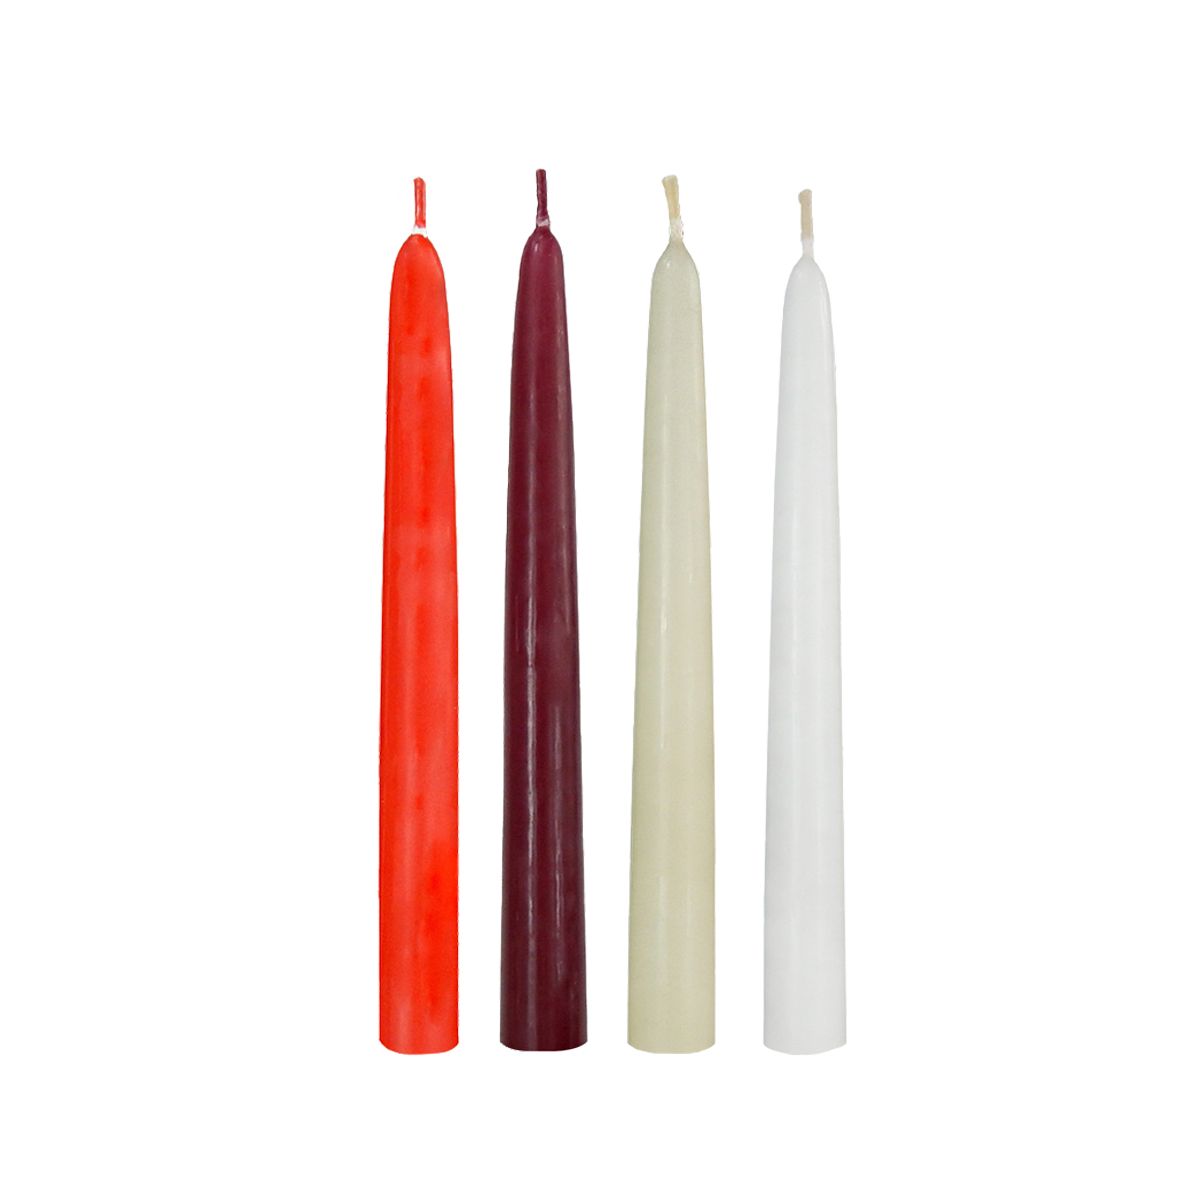 6 x Dinner Bistro Candles Non Drip Table Stick Tapered Taper Candls Colour Color 